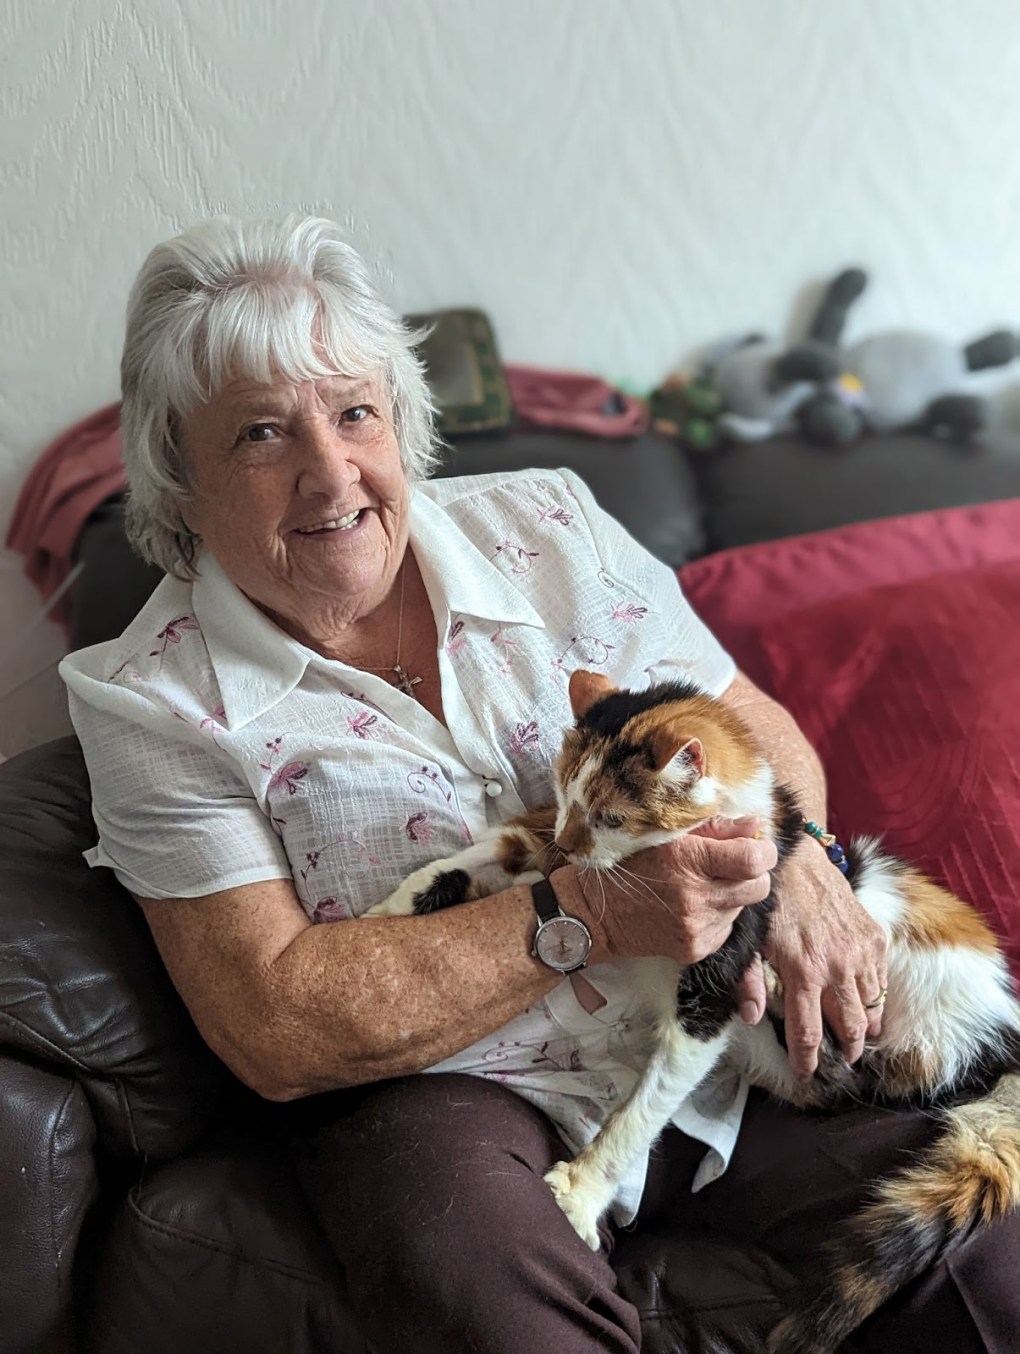 A Purr-fect Reunion: Cat Missing Since 2016 is Reunited With Couple by RSPCA